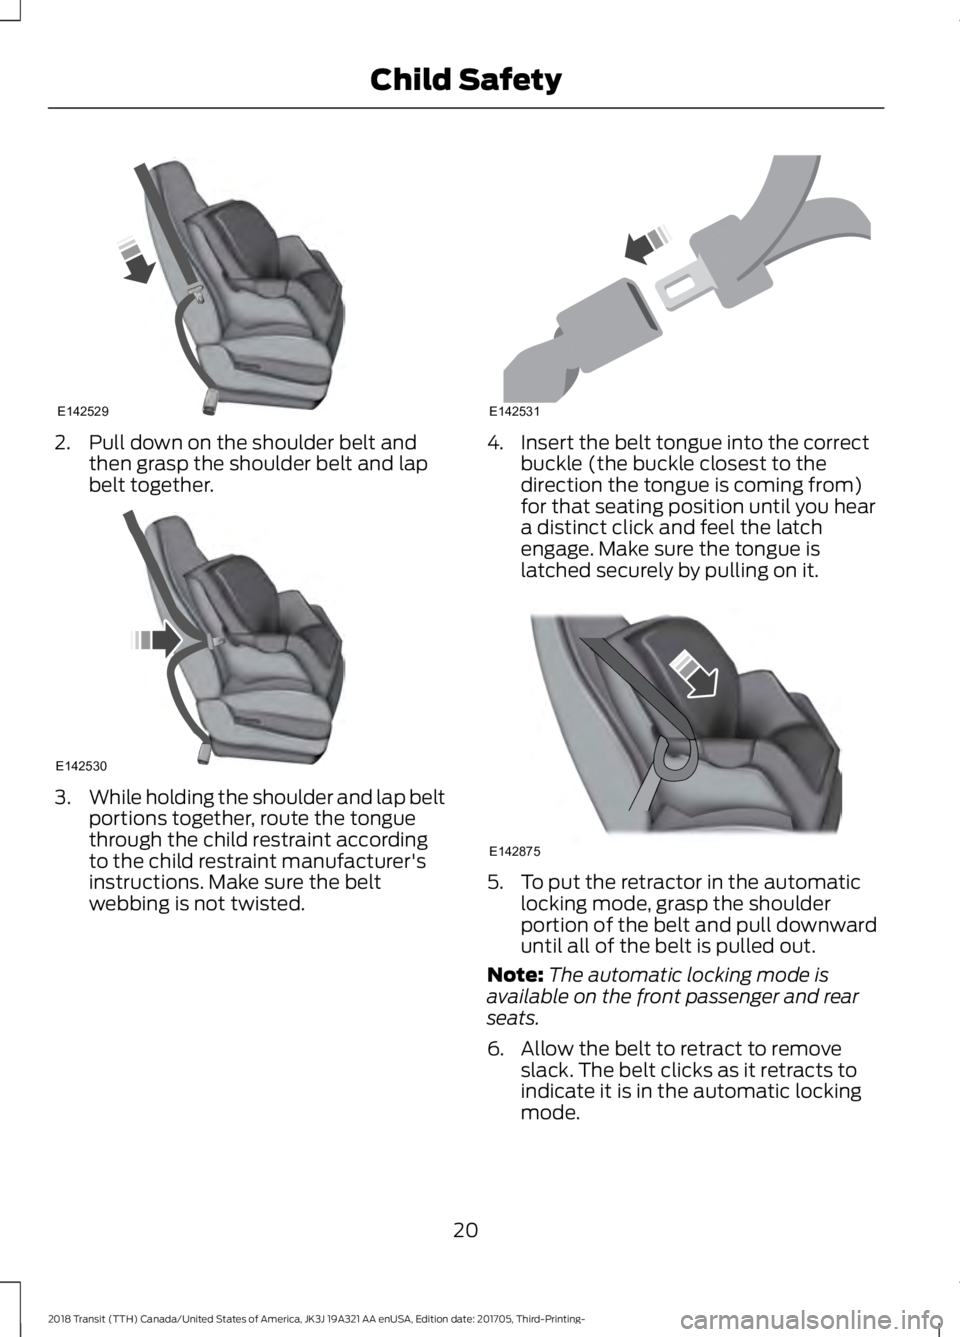 FORD TRANSIT 2018 Owners Manual 2. Pull down on the shoulder belt and
then grasp the shoulder belt and lap
belt together. 3.
While holding the shoulder and lap belt
portions together, route the tongue
through the child restraint acc